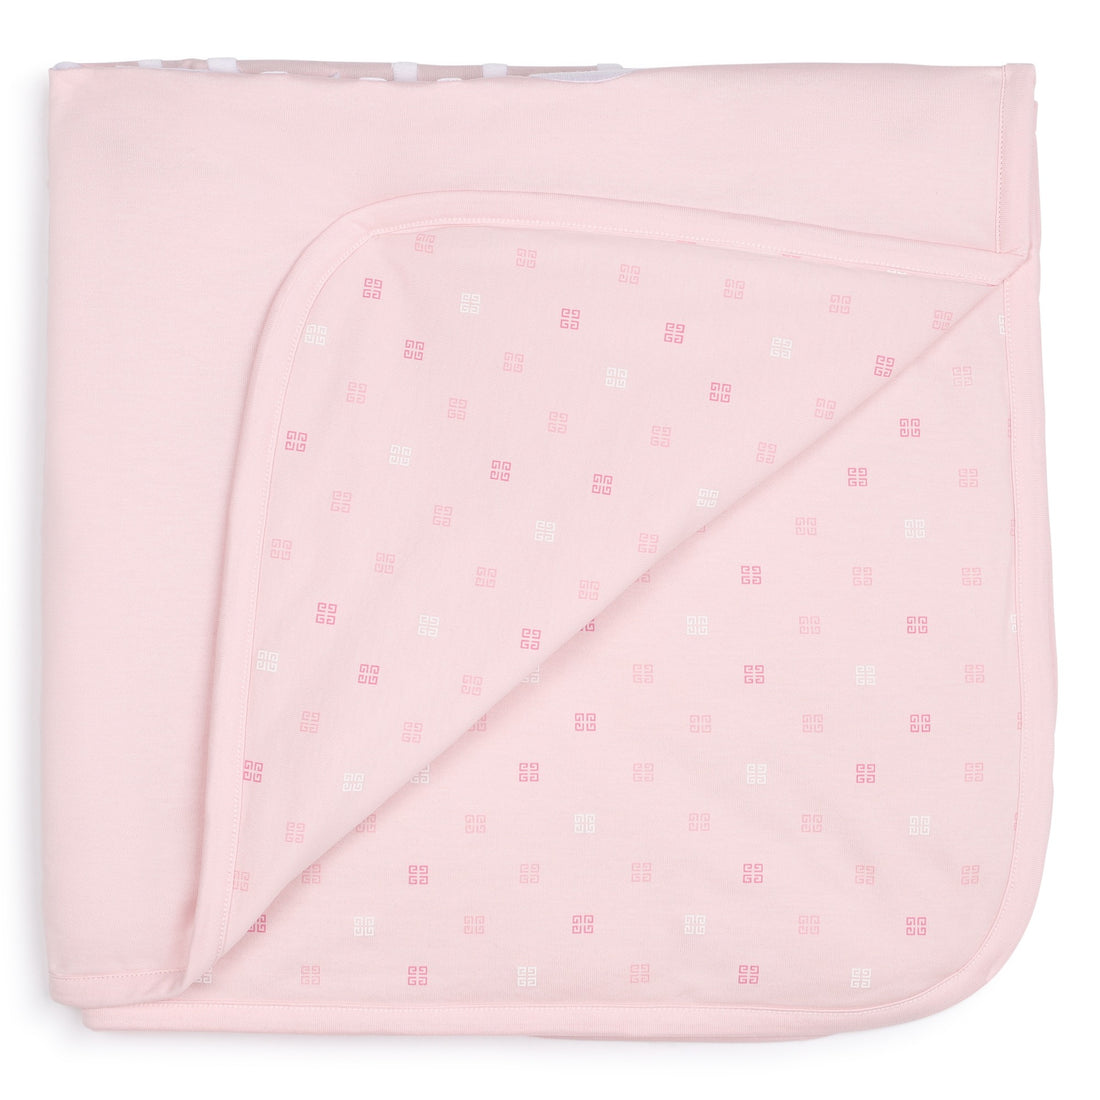 Givenchy Baby Blanket Marshmallow Pink - Soft and Cozy Comfort | Schools Out